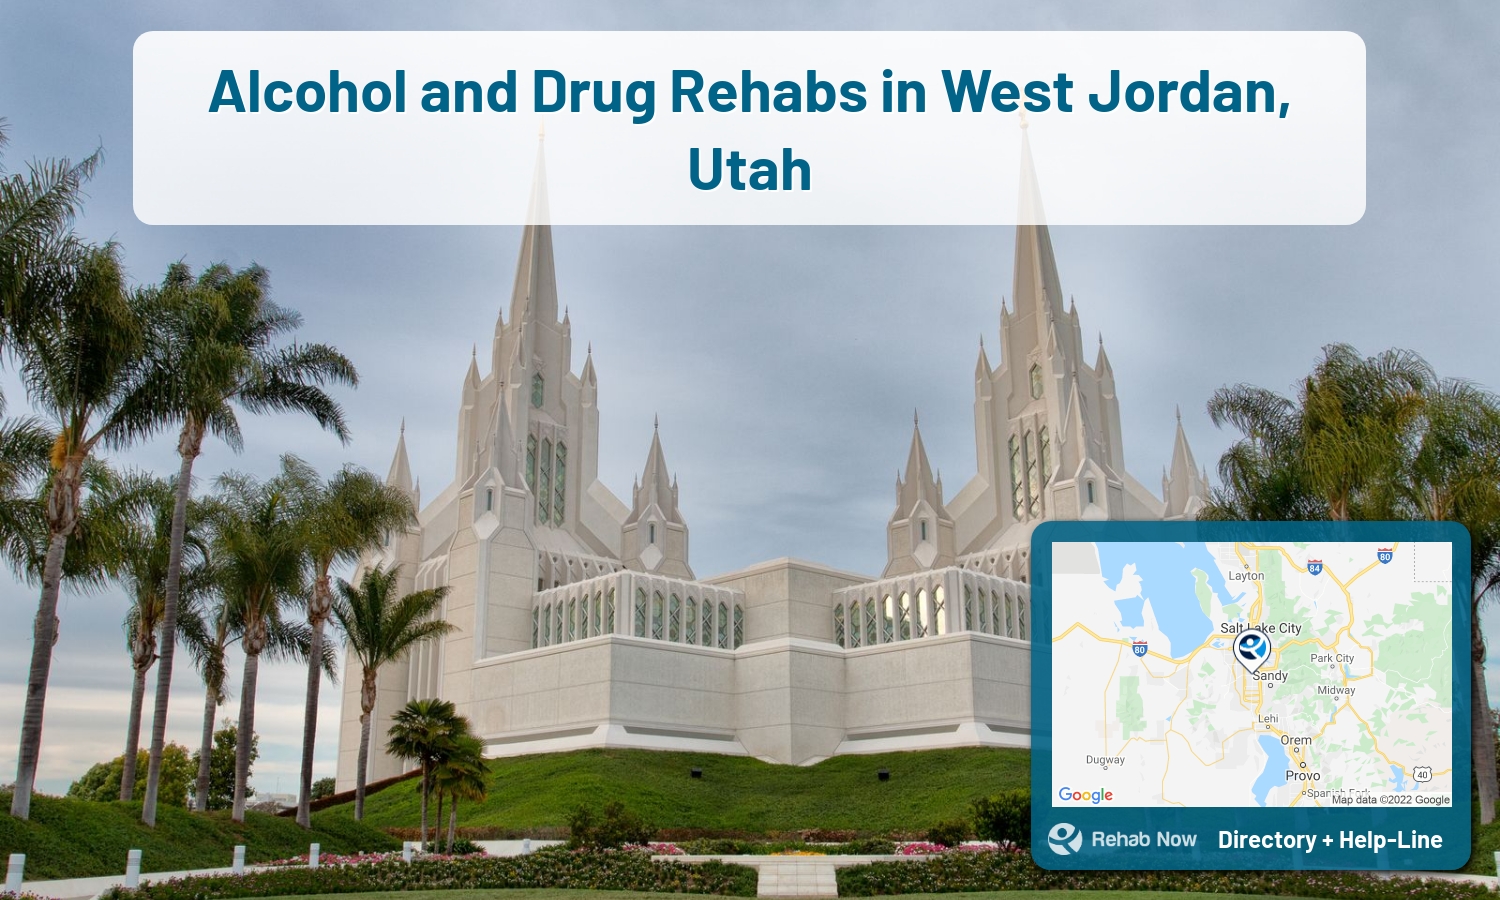 Ready to pick a rehab center in West Jordan? Get off alcohol, opiates, and other drugs, by selecting top drug rehab centers in Utah